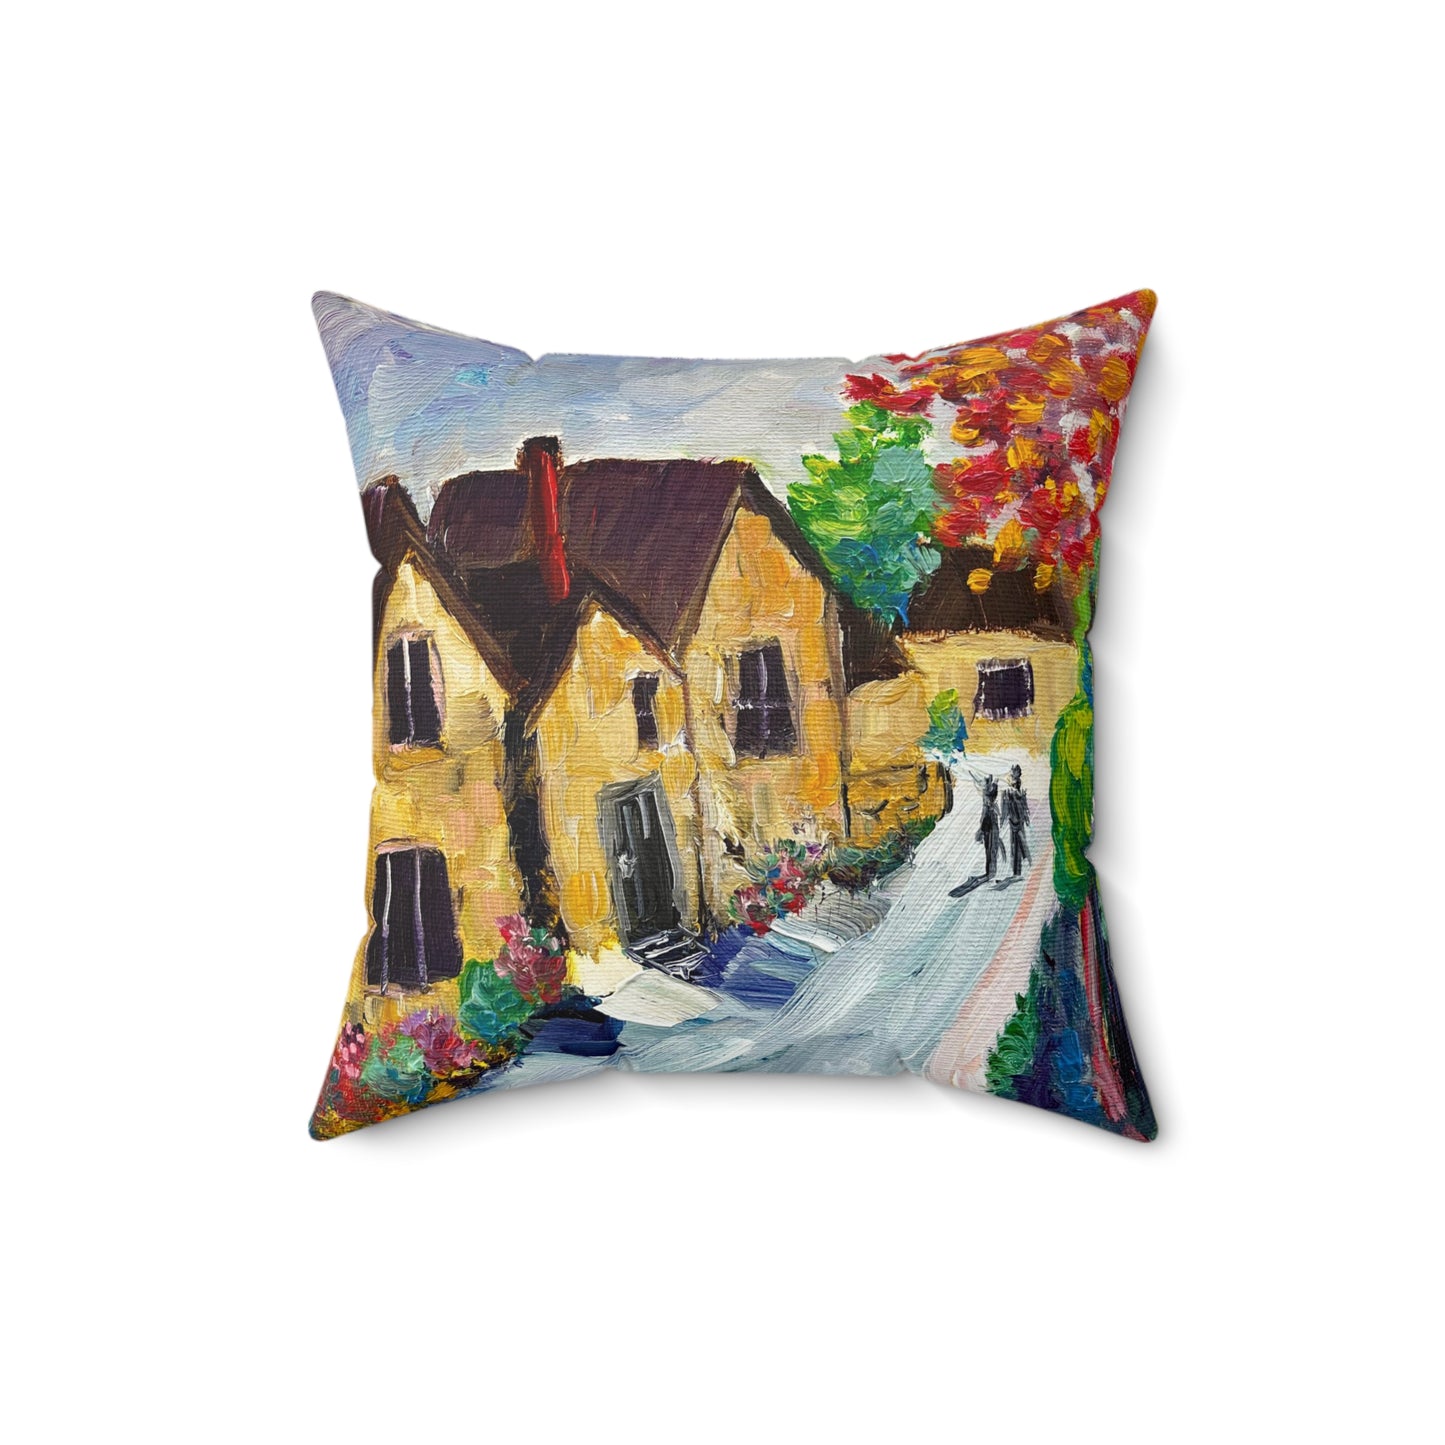 Charming Medieval Cottages Cotswolds Village Indoor Spun Polyester Square Pillow